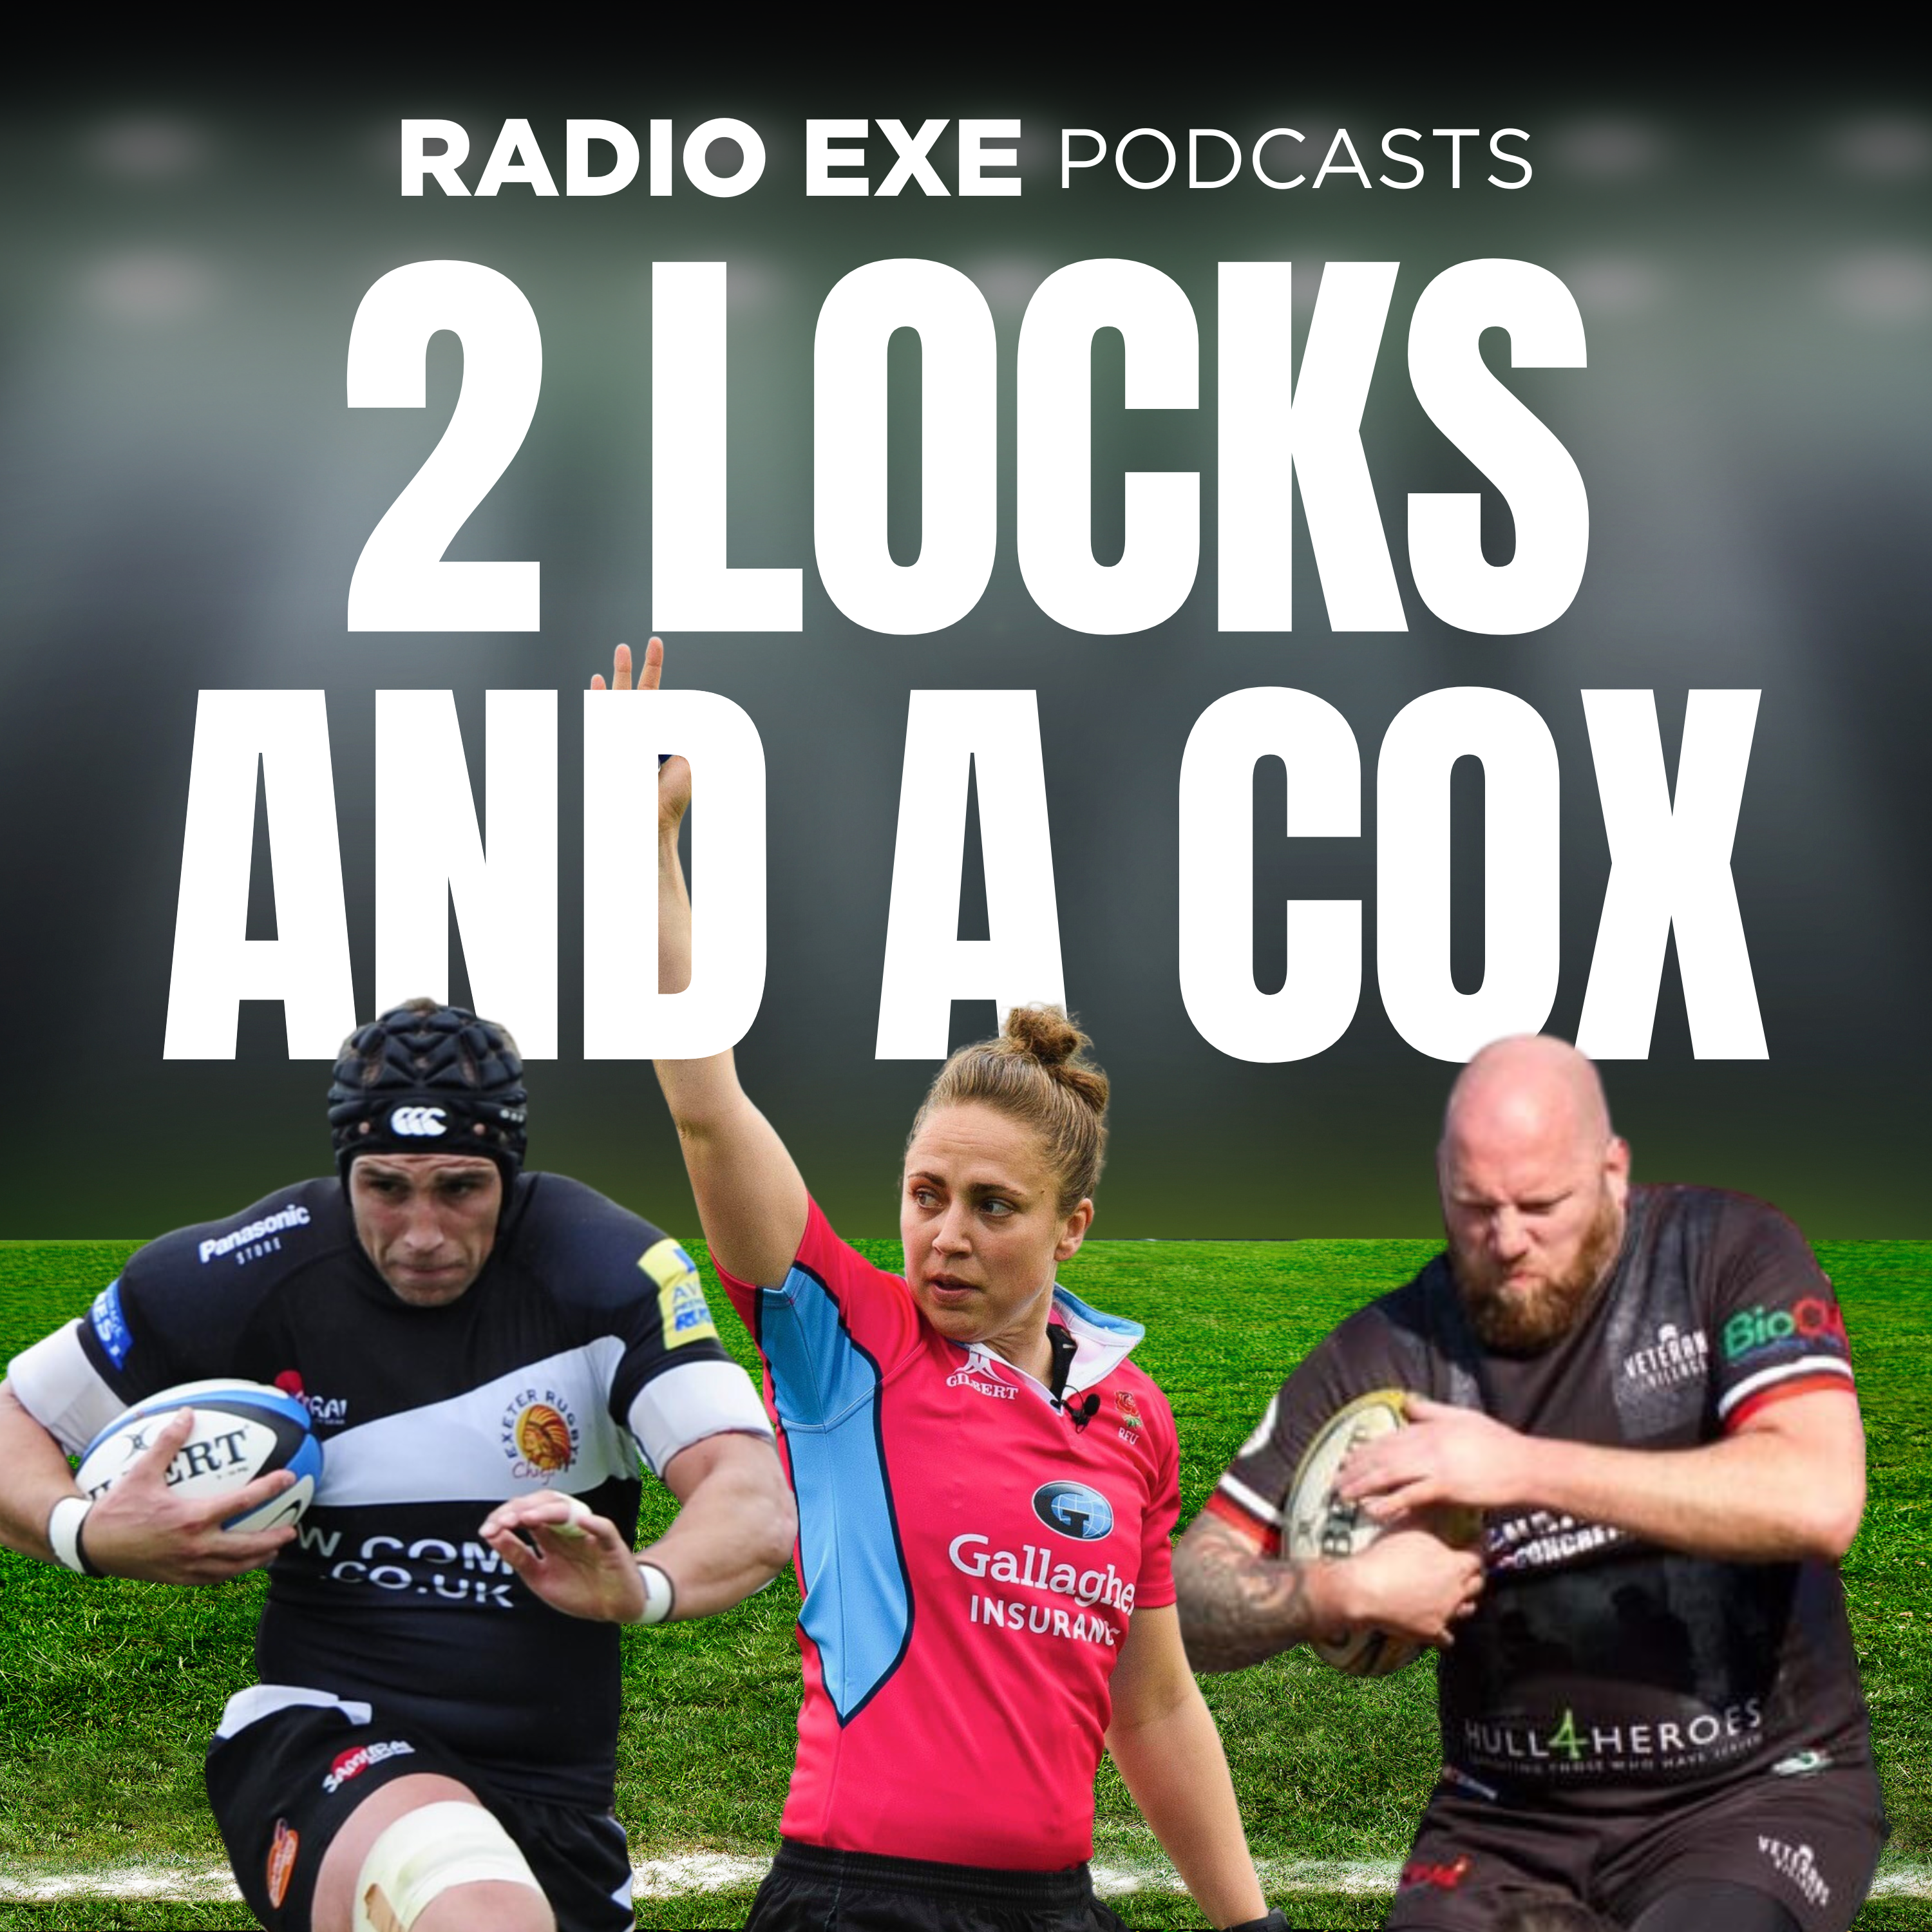 2 locks and a Cox – from Devon’s Radio Exe